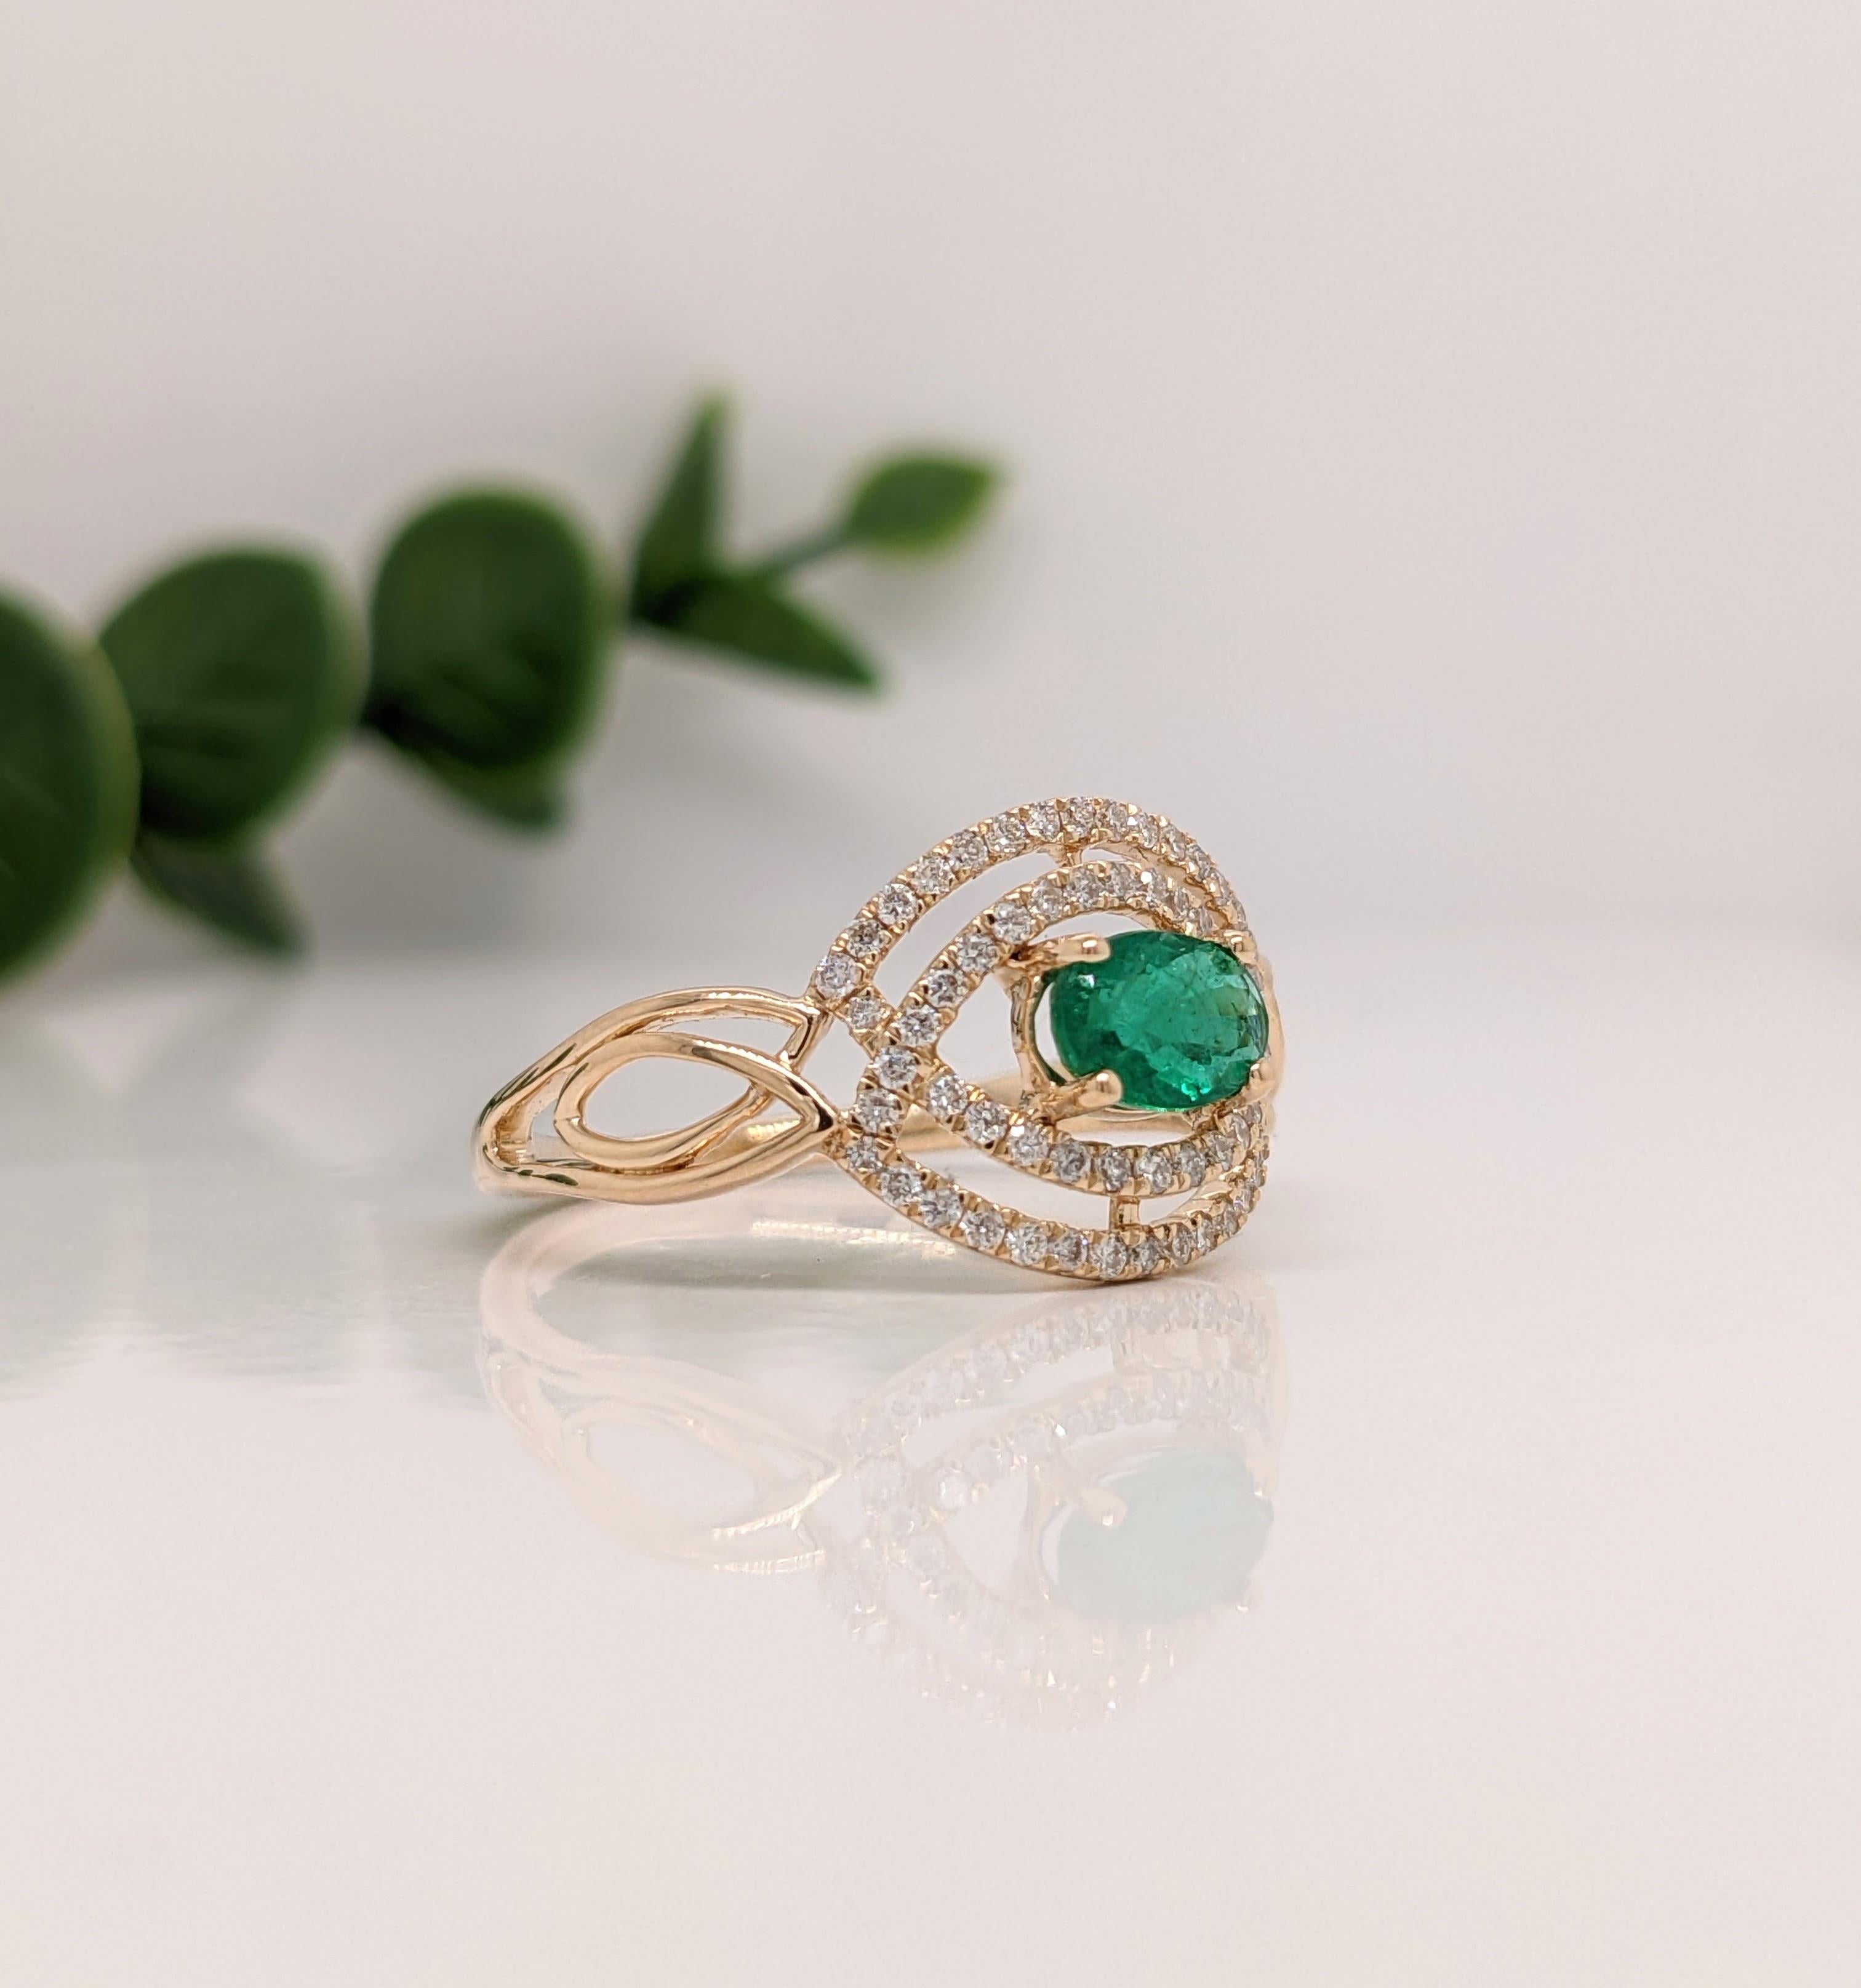 This beautiful east west ring features a vibrant green Emerald in 14k yellow Gold with a pave diamond double halo in a unique design.

Specifications

Item Type: Ring
Center Stone: Emerald
Treatment: Oiled
Weight: 0.47ct
Size: 6x4mm
Shape: Oval
Cut: